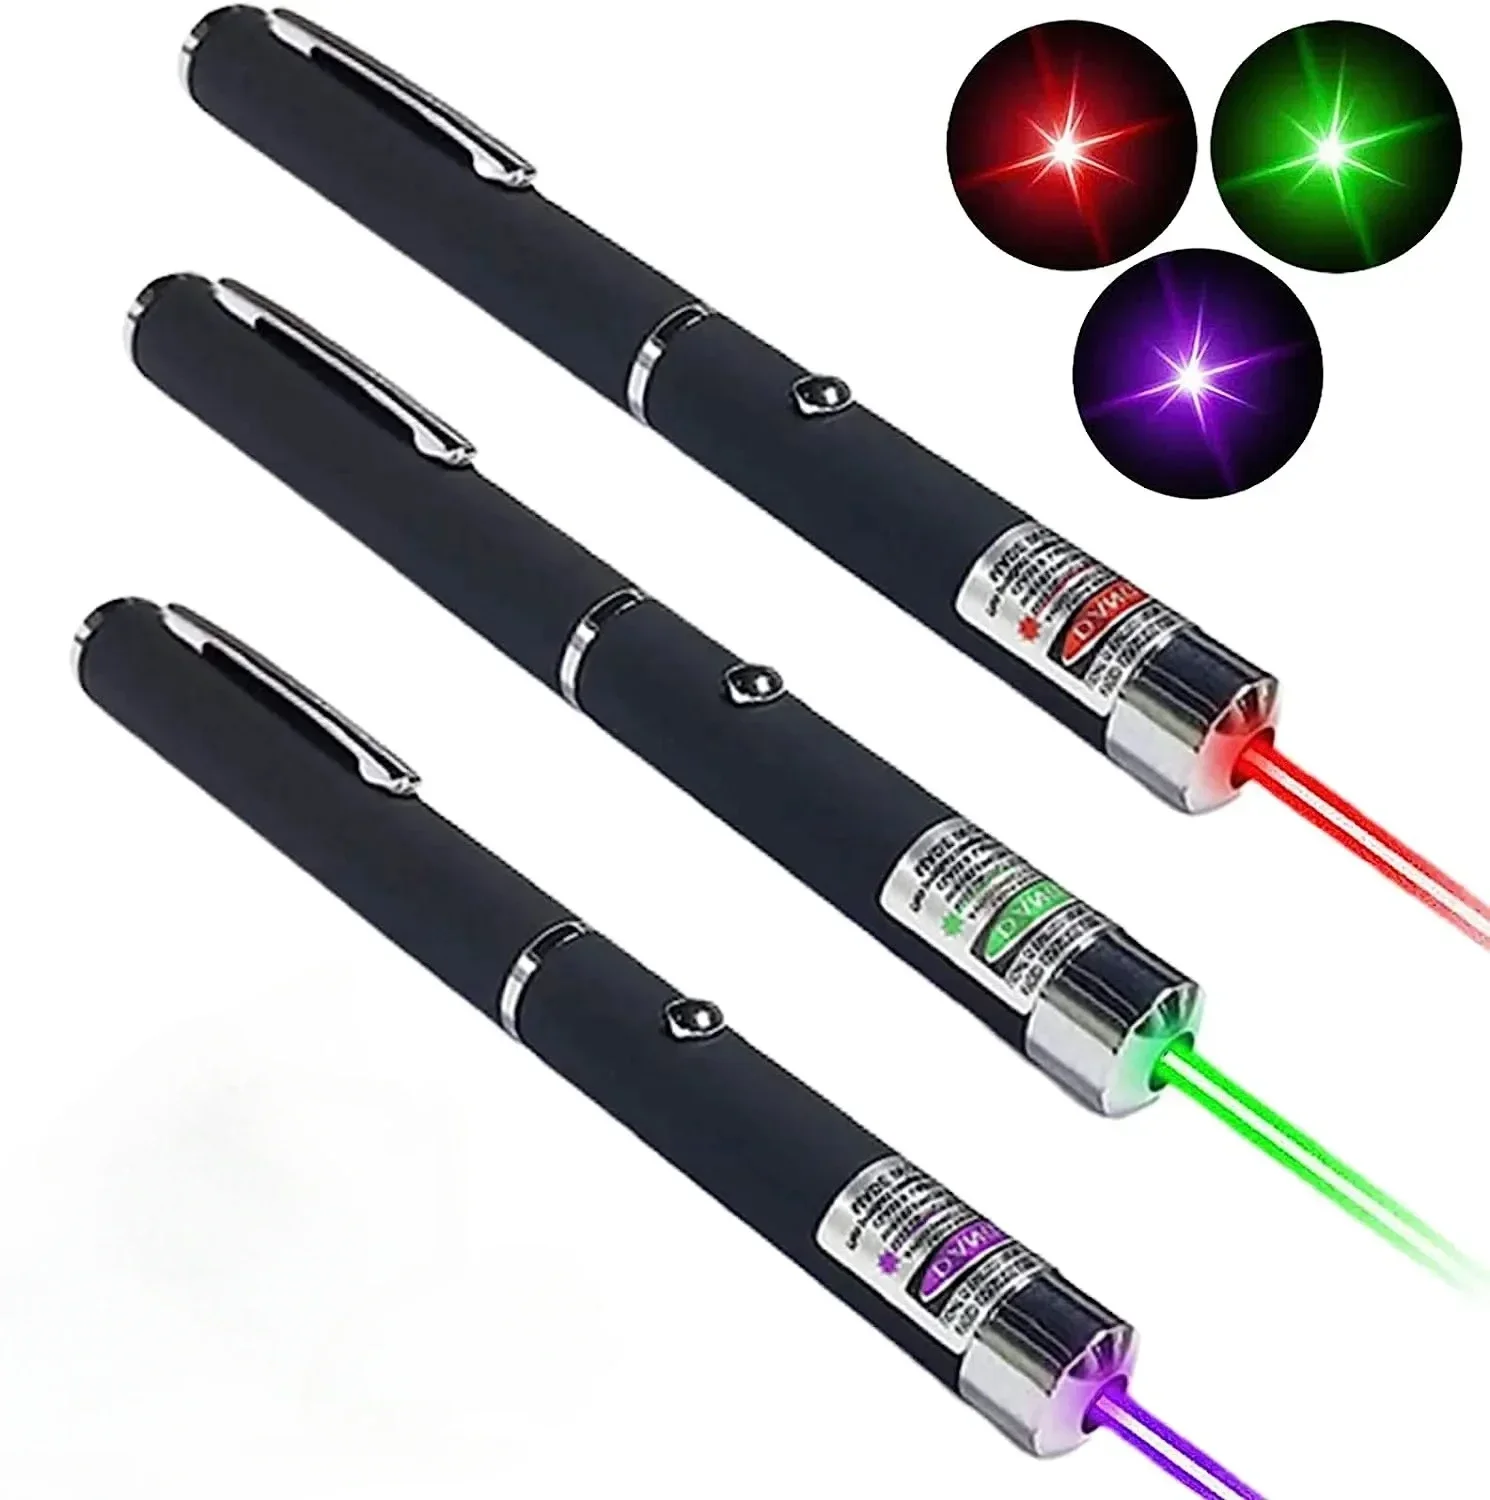 

USB Built-in Battery -711 Laser Pointer Can Be Used For Teaching Sales Hunting Sand Table 5MW Red Dot Visible Focus Laser Pen